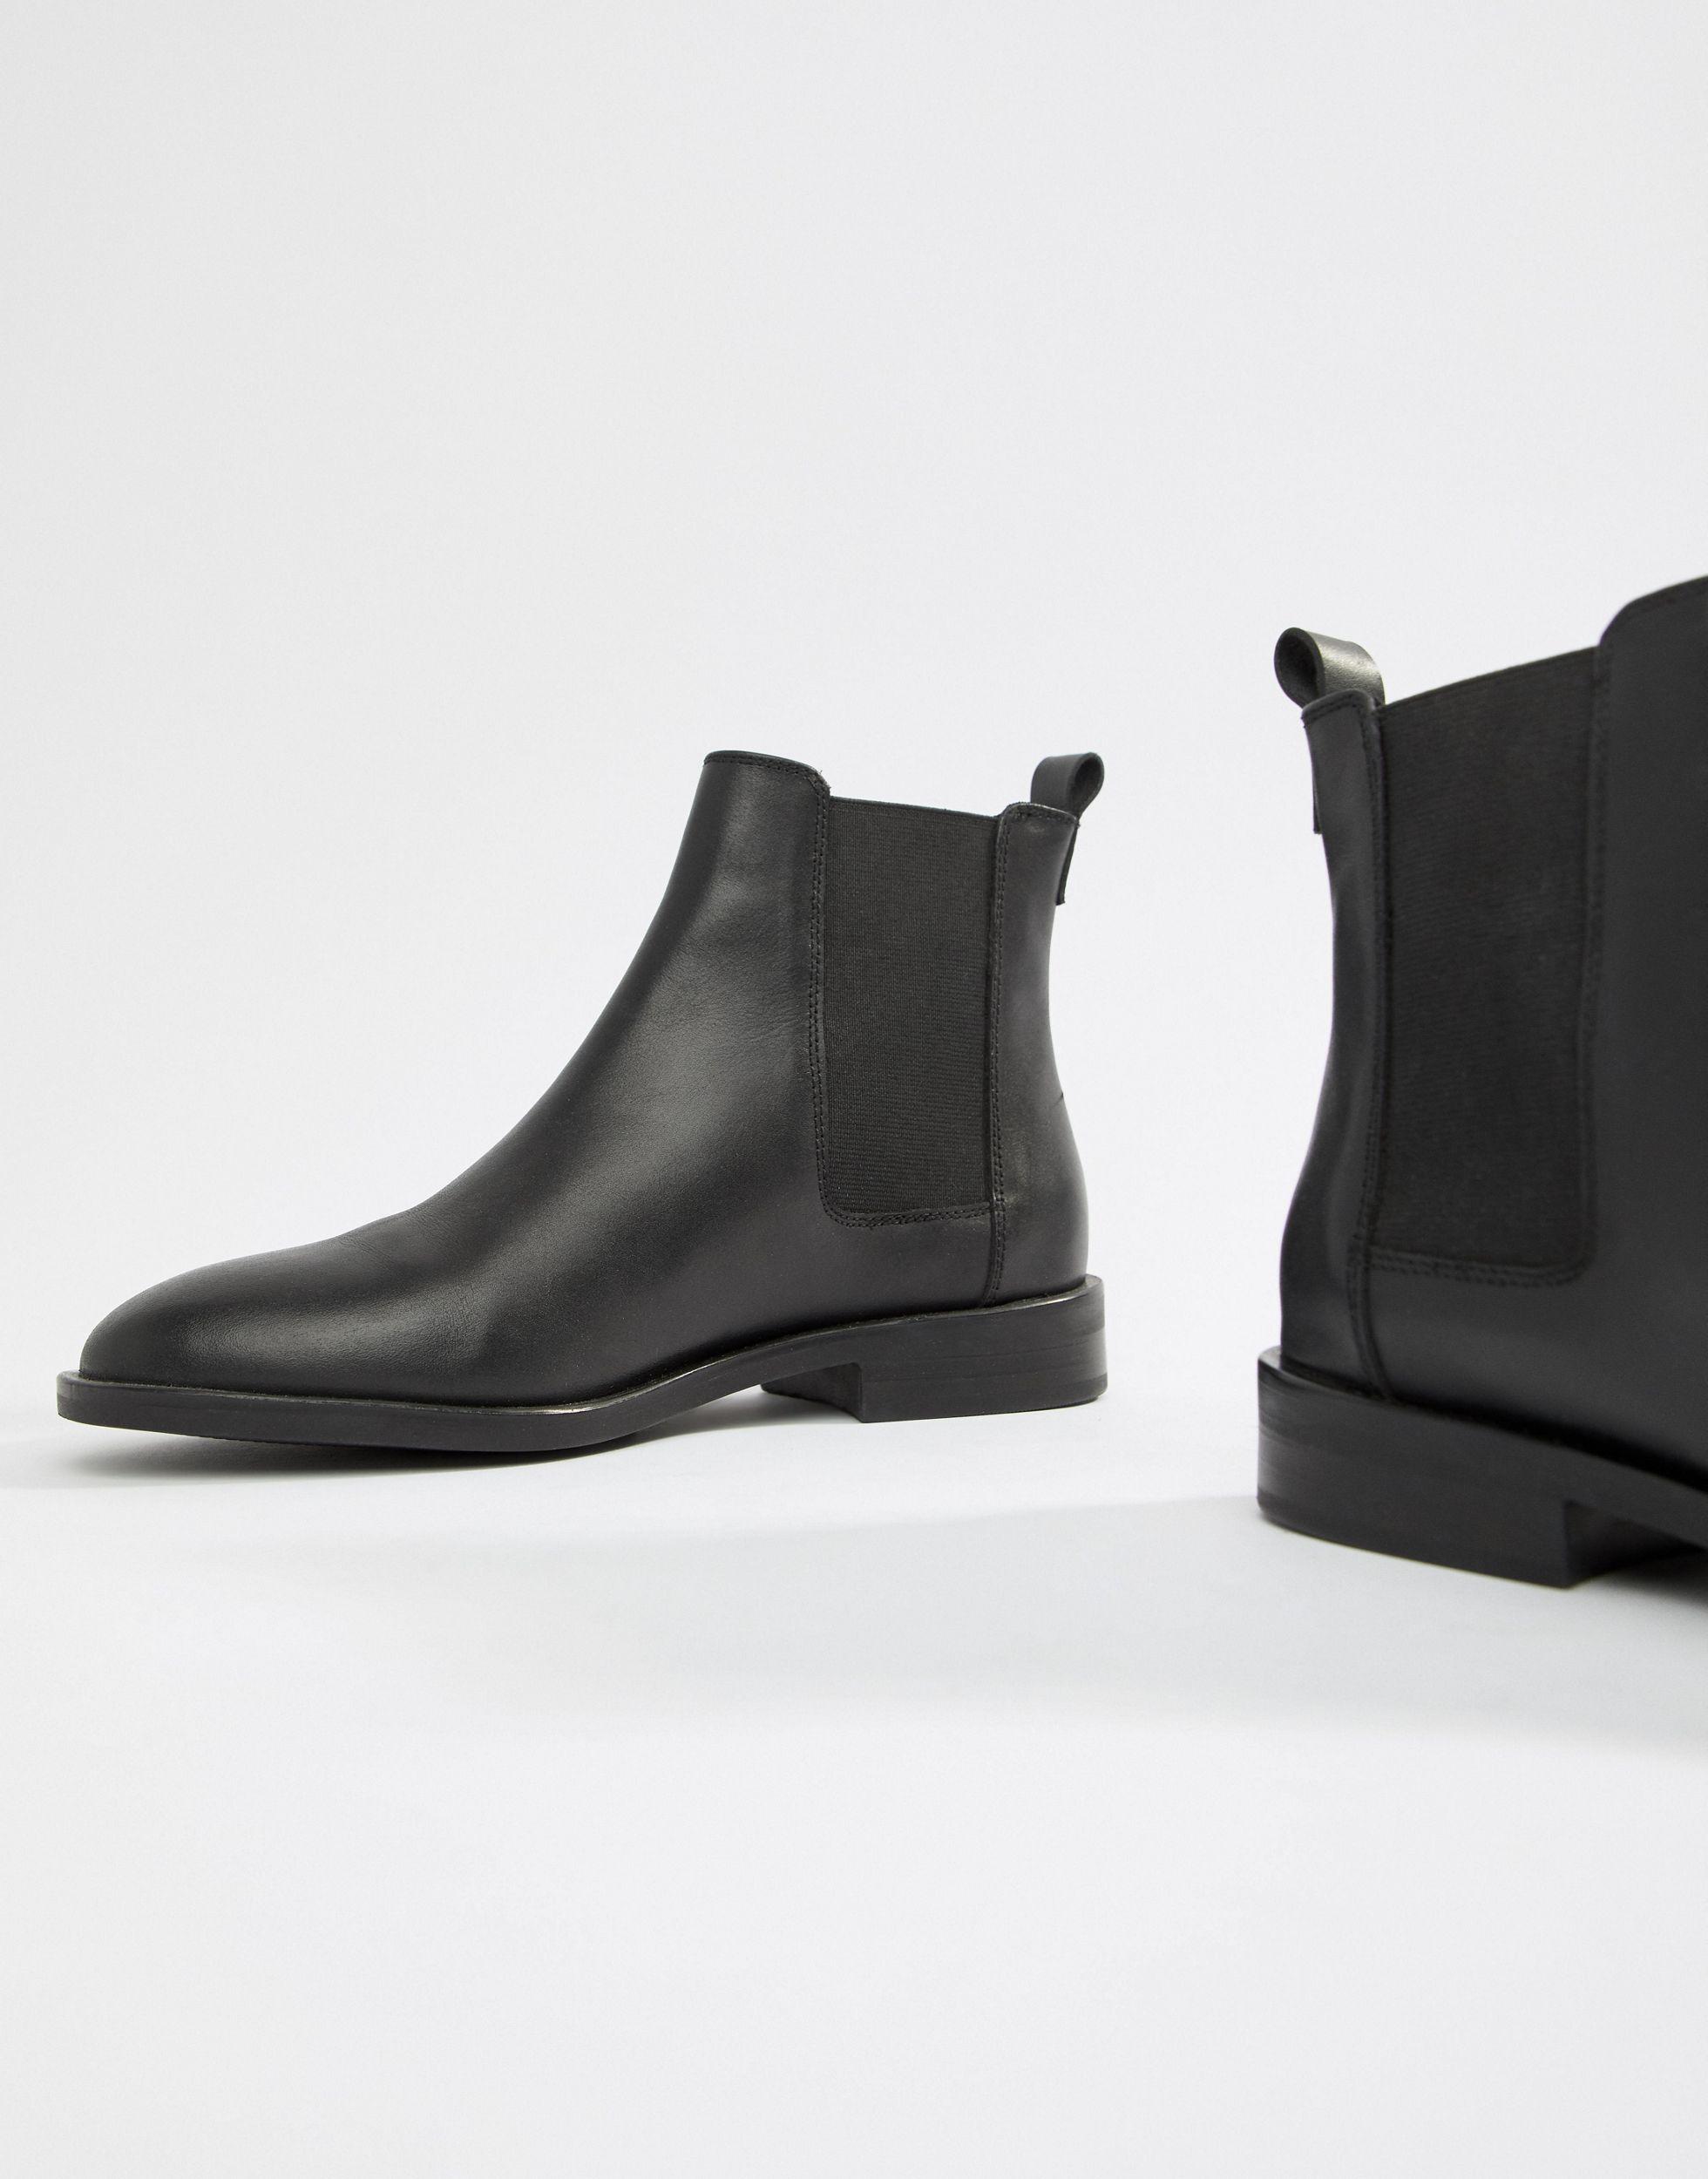 ASOS Aura Leather Chelsea Ankle Boots 